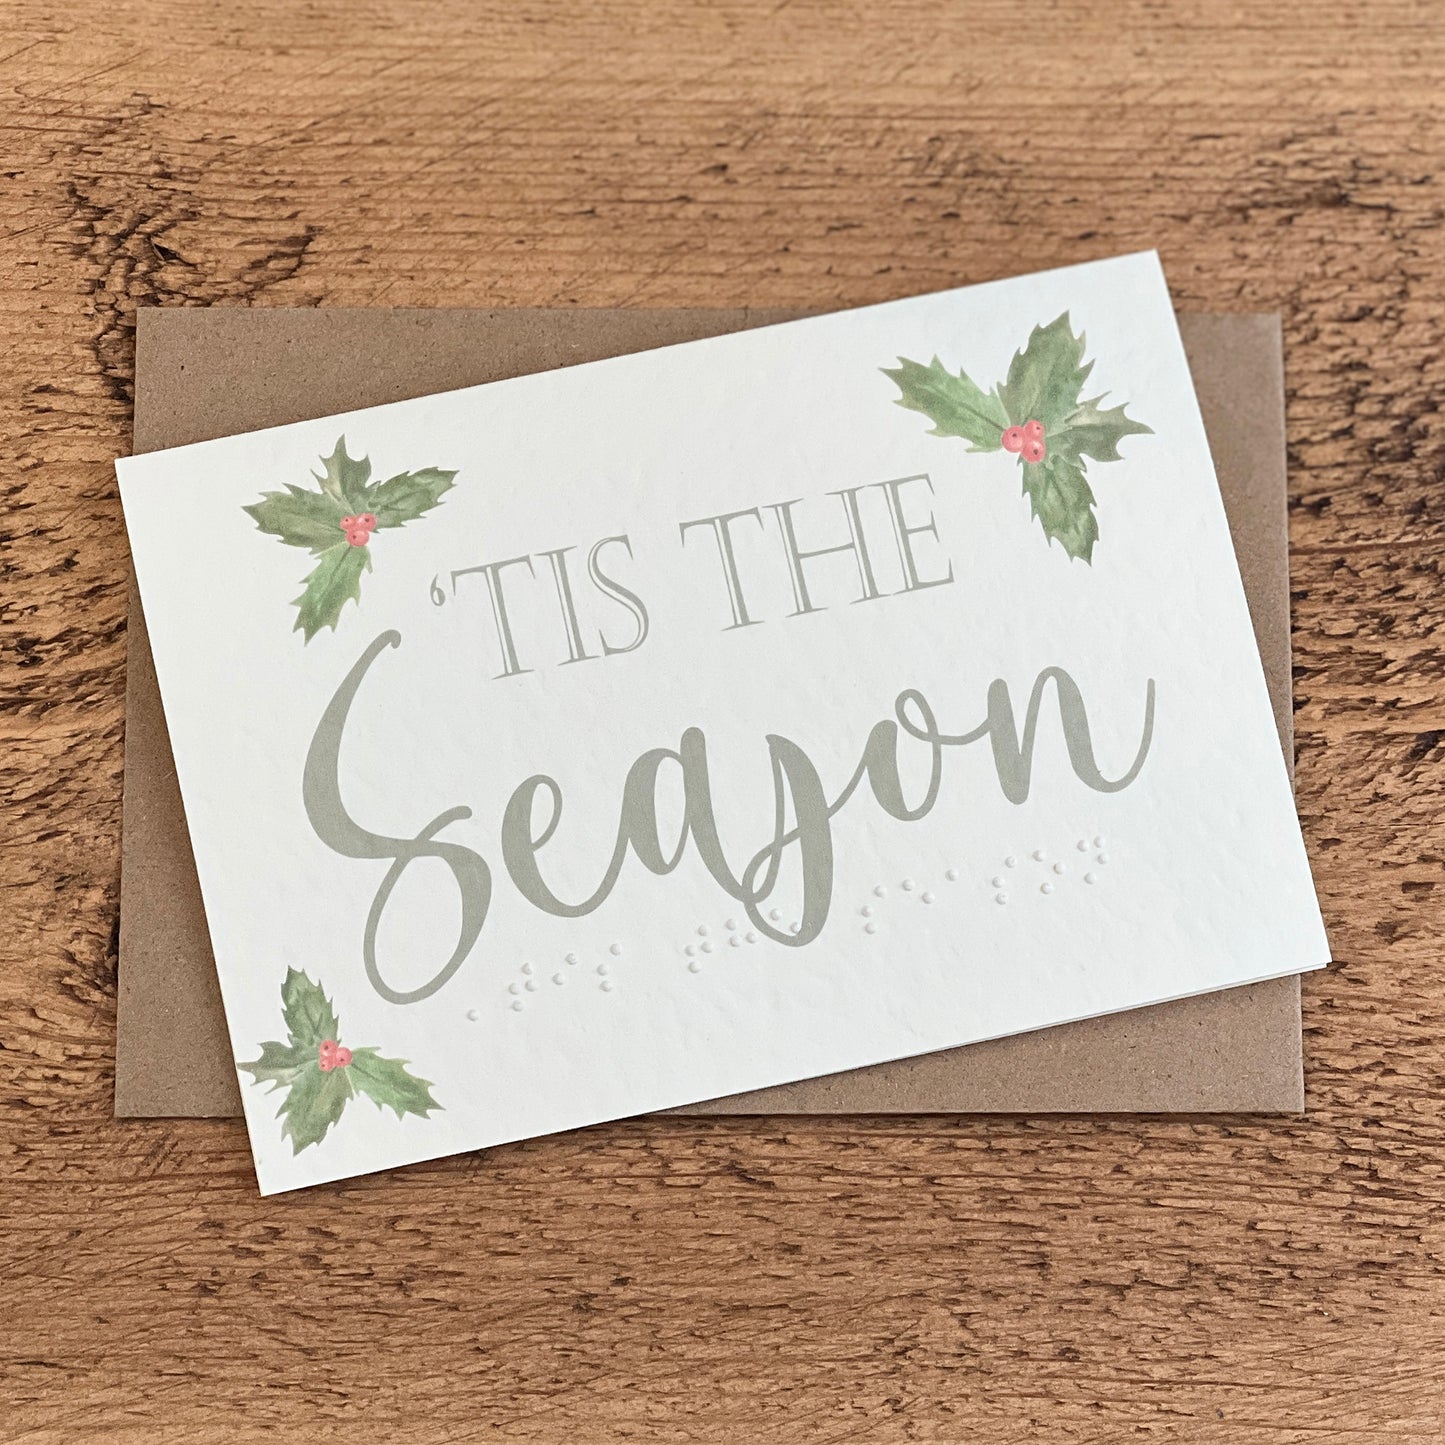 A textured white card with 'Tis The Season written in a green font with holly leaves around the card, the same text is written in braille along the bottom.